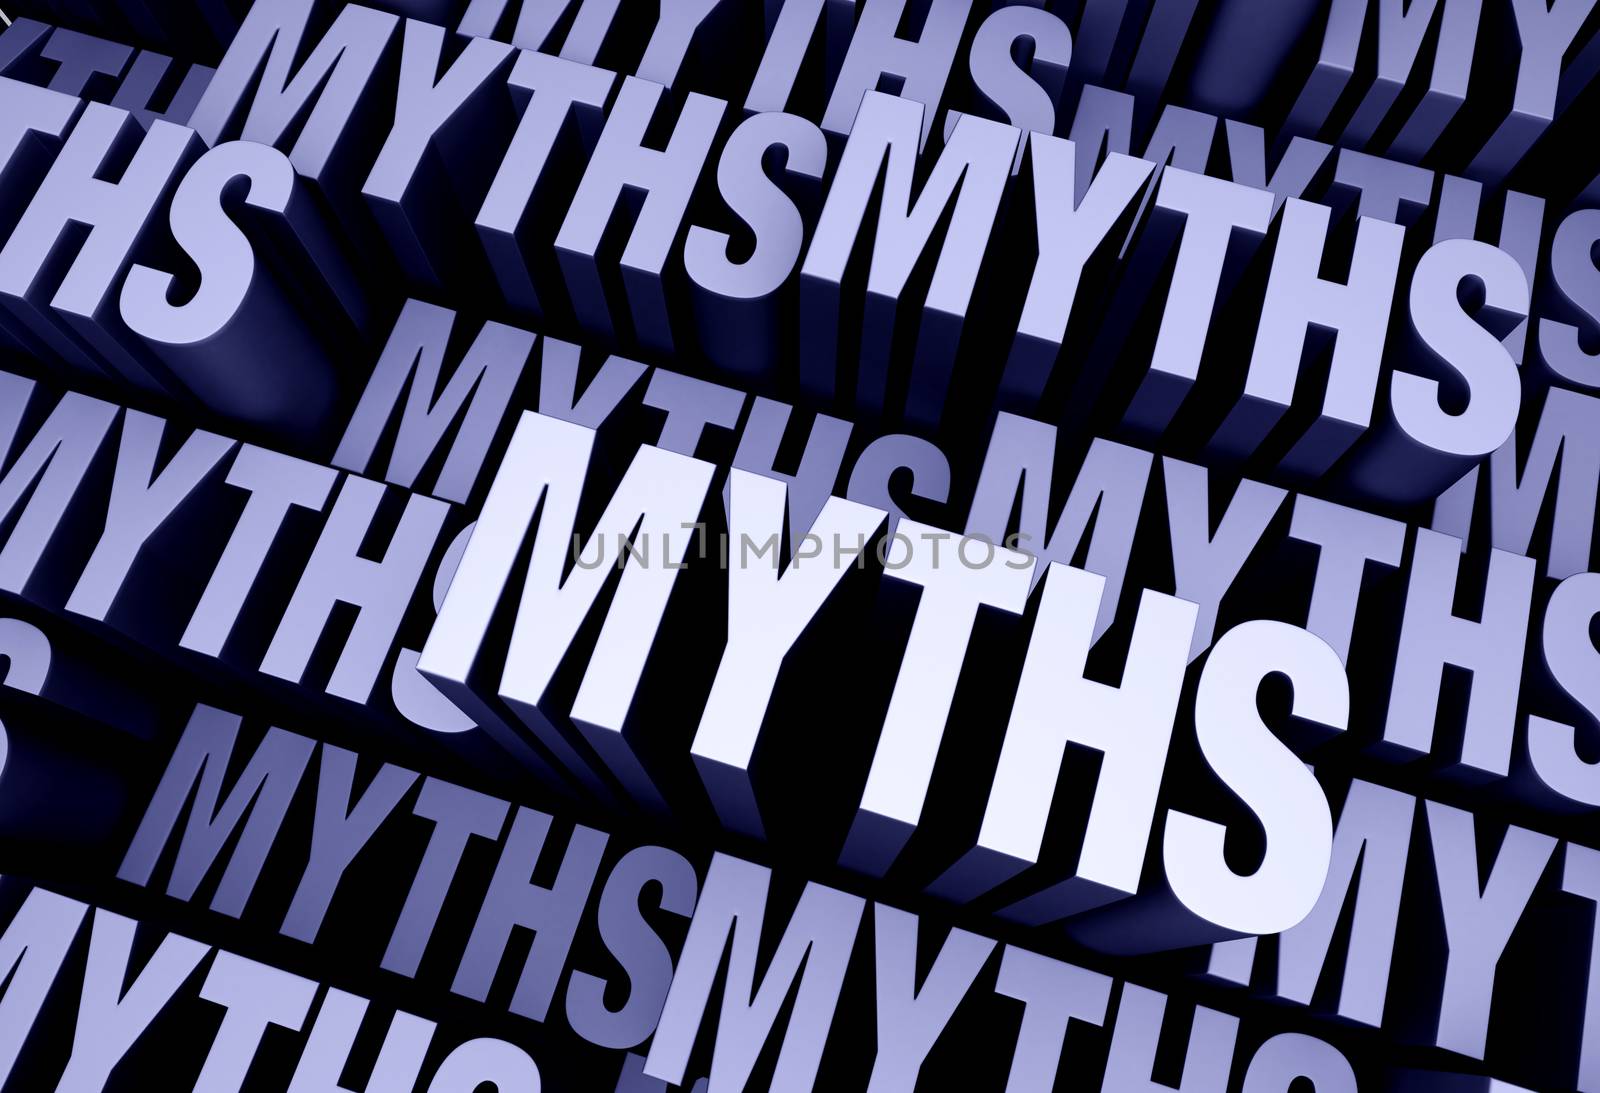 A 3D blue gray background filled with the word "MYTHS" repeated many times a different depths.